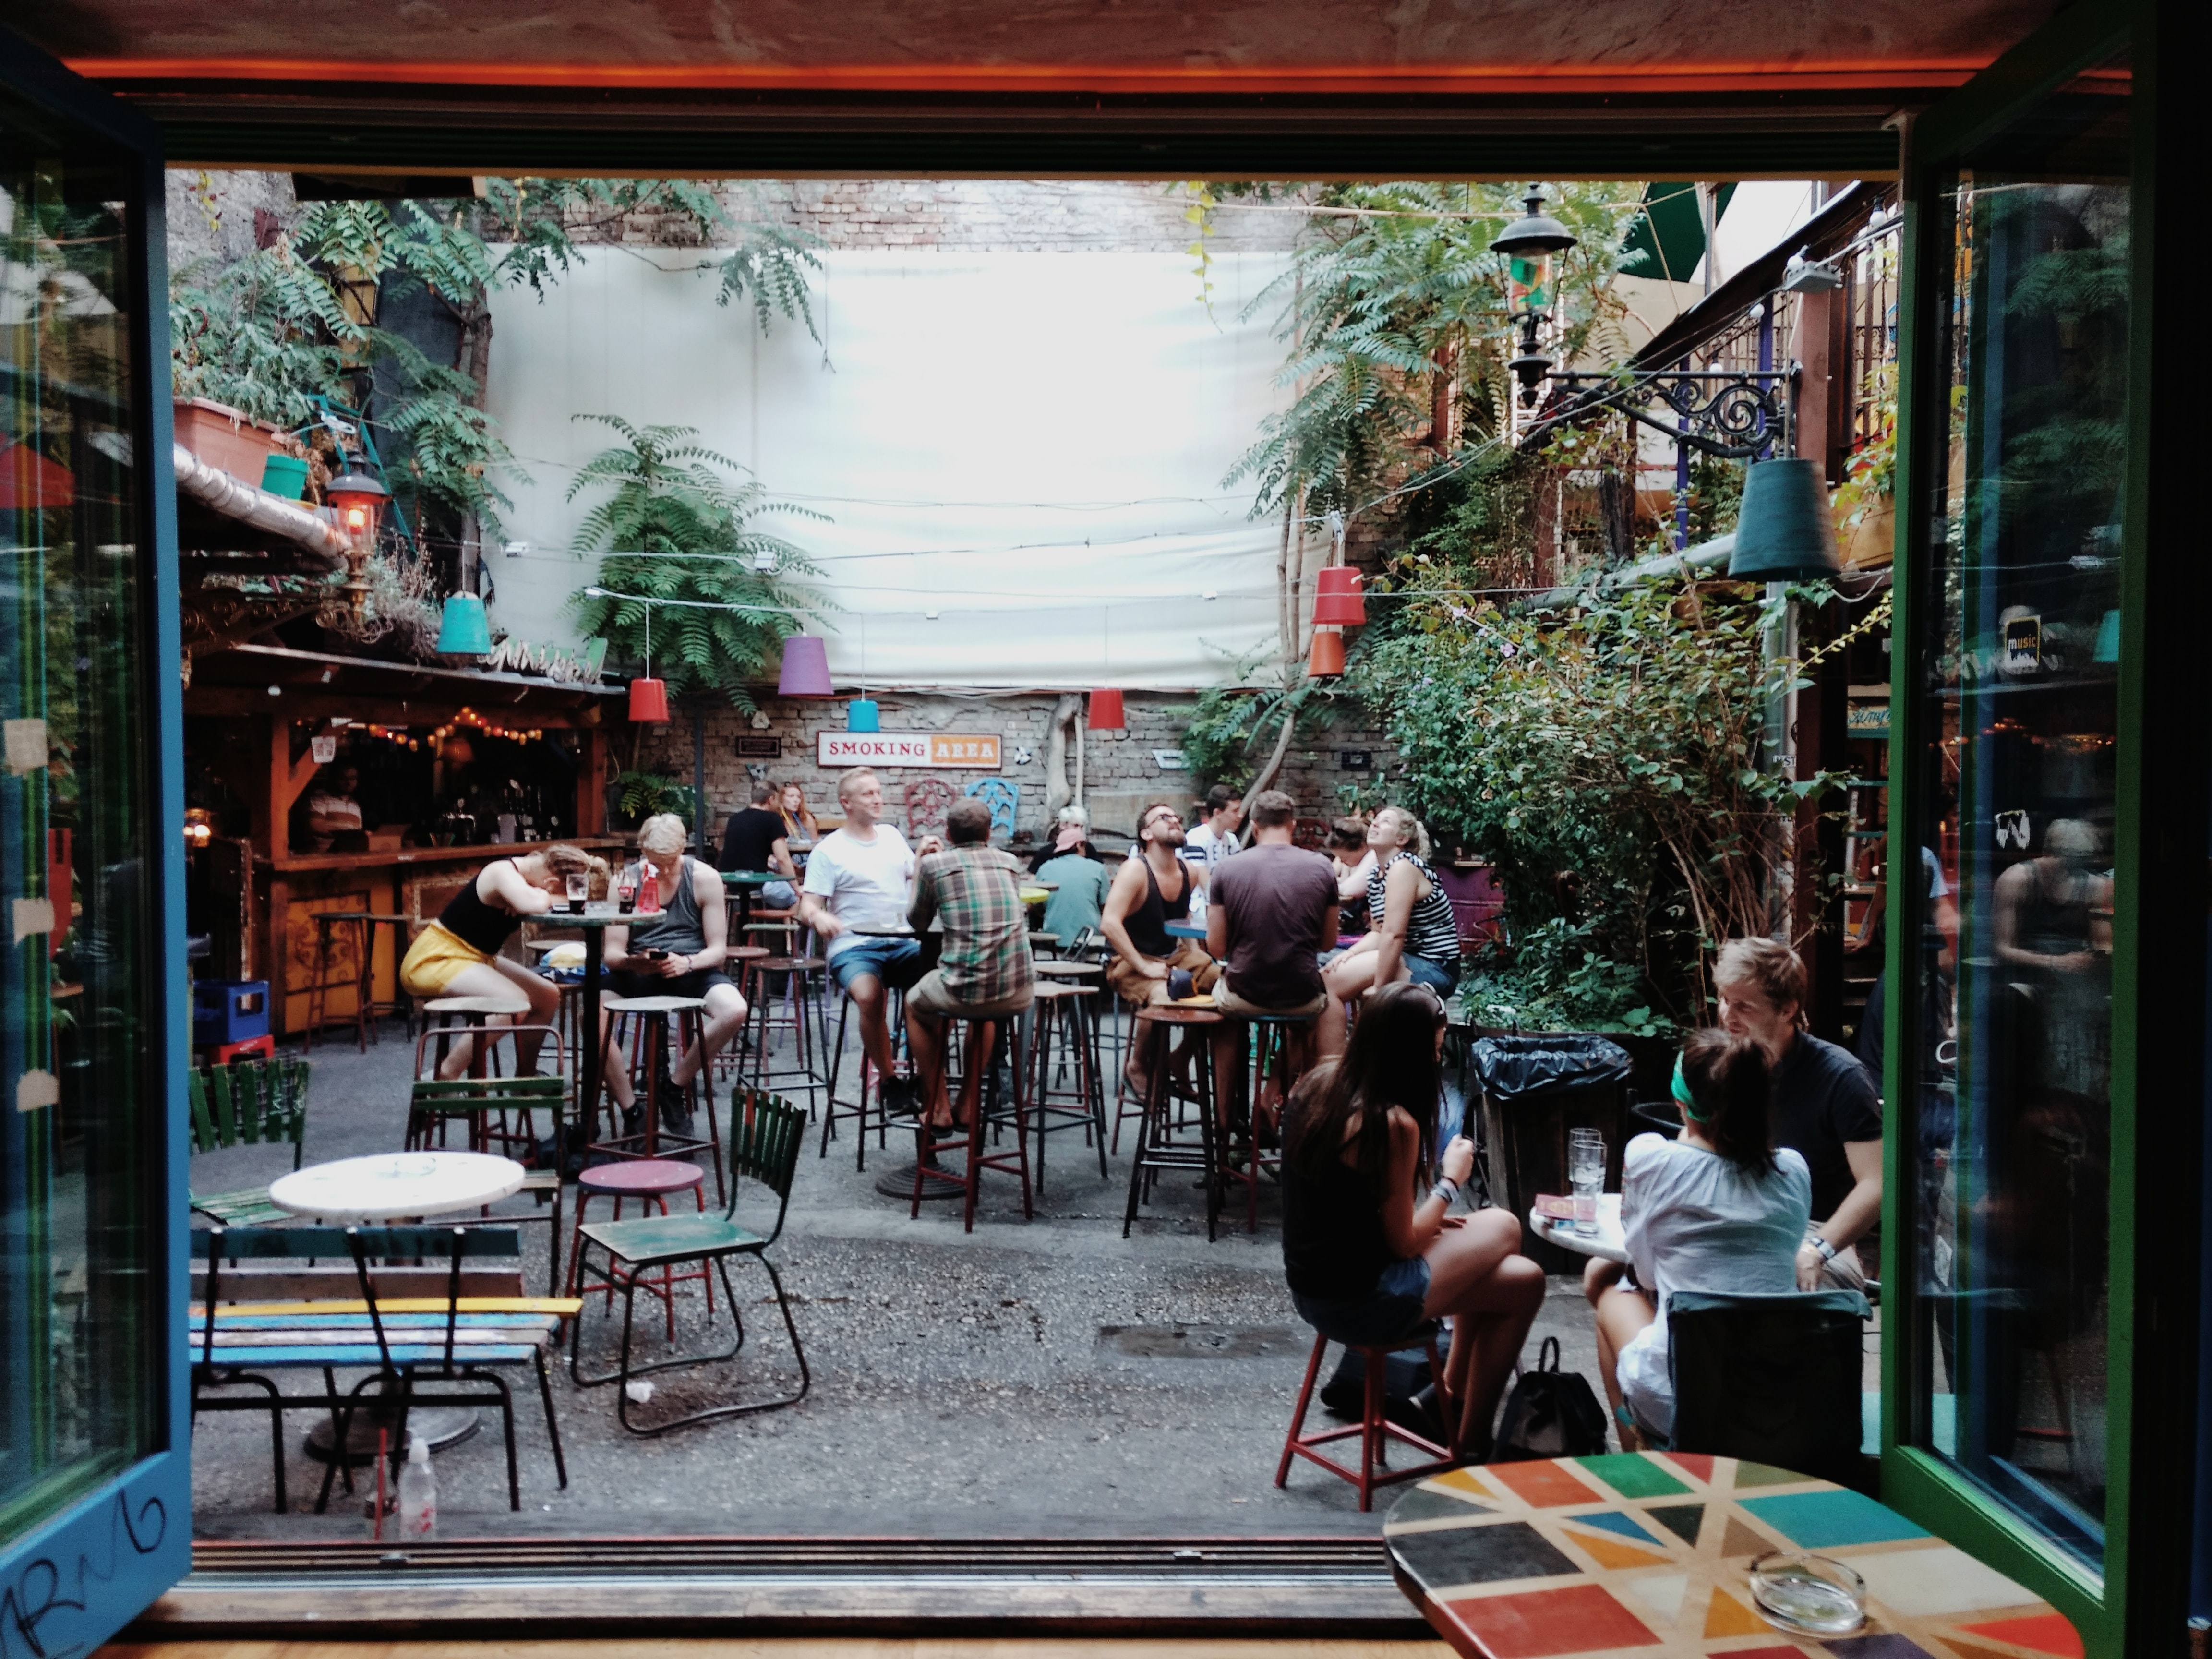 The Guide to Beer Gardens Gets A Redesign